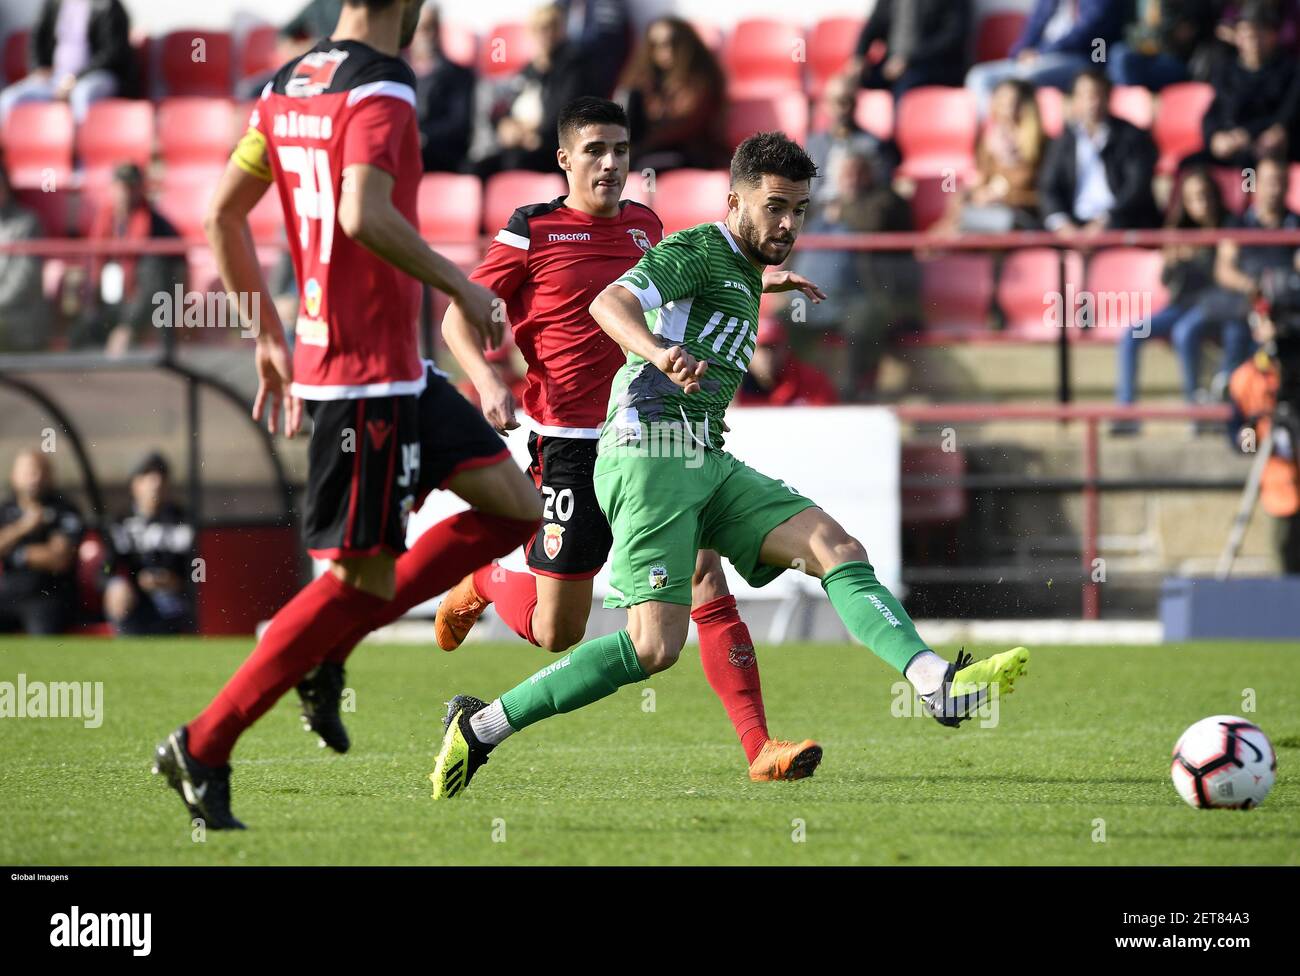 Penafiel 12 23 2018 Football Club Penafiel Played This Morning Against Sporting Clube Farense The Match Of The 13th Matchday Of The Second Portuguese Soccer League Played At The Esta Dio Municipal De 25